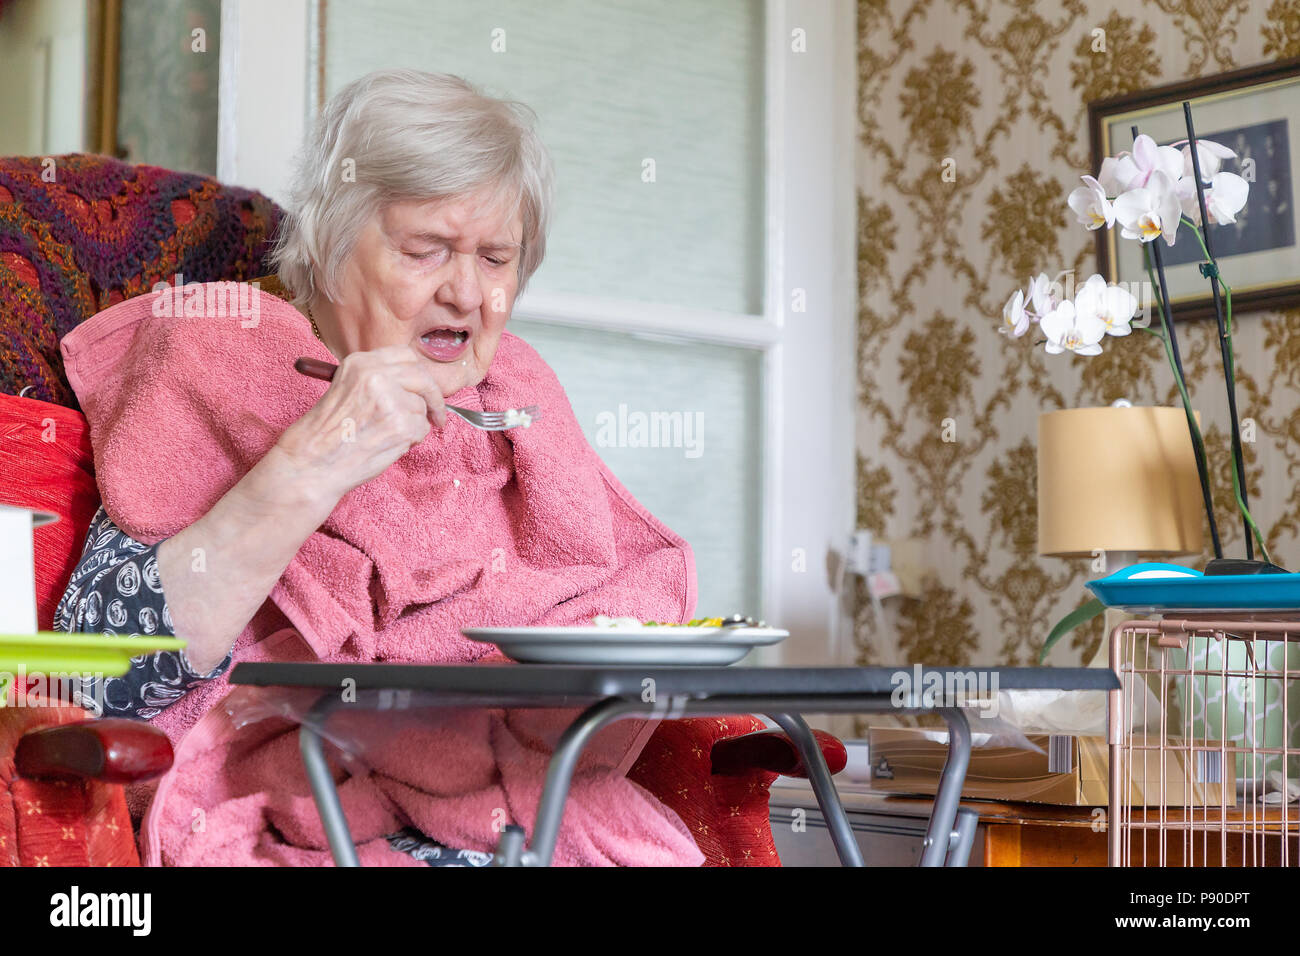 Old lady with dementia sitting in her recliner chair eating her lunch from a table with a towel as a bib Stock Photo